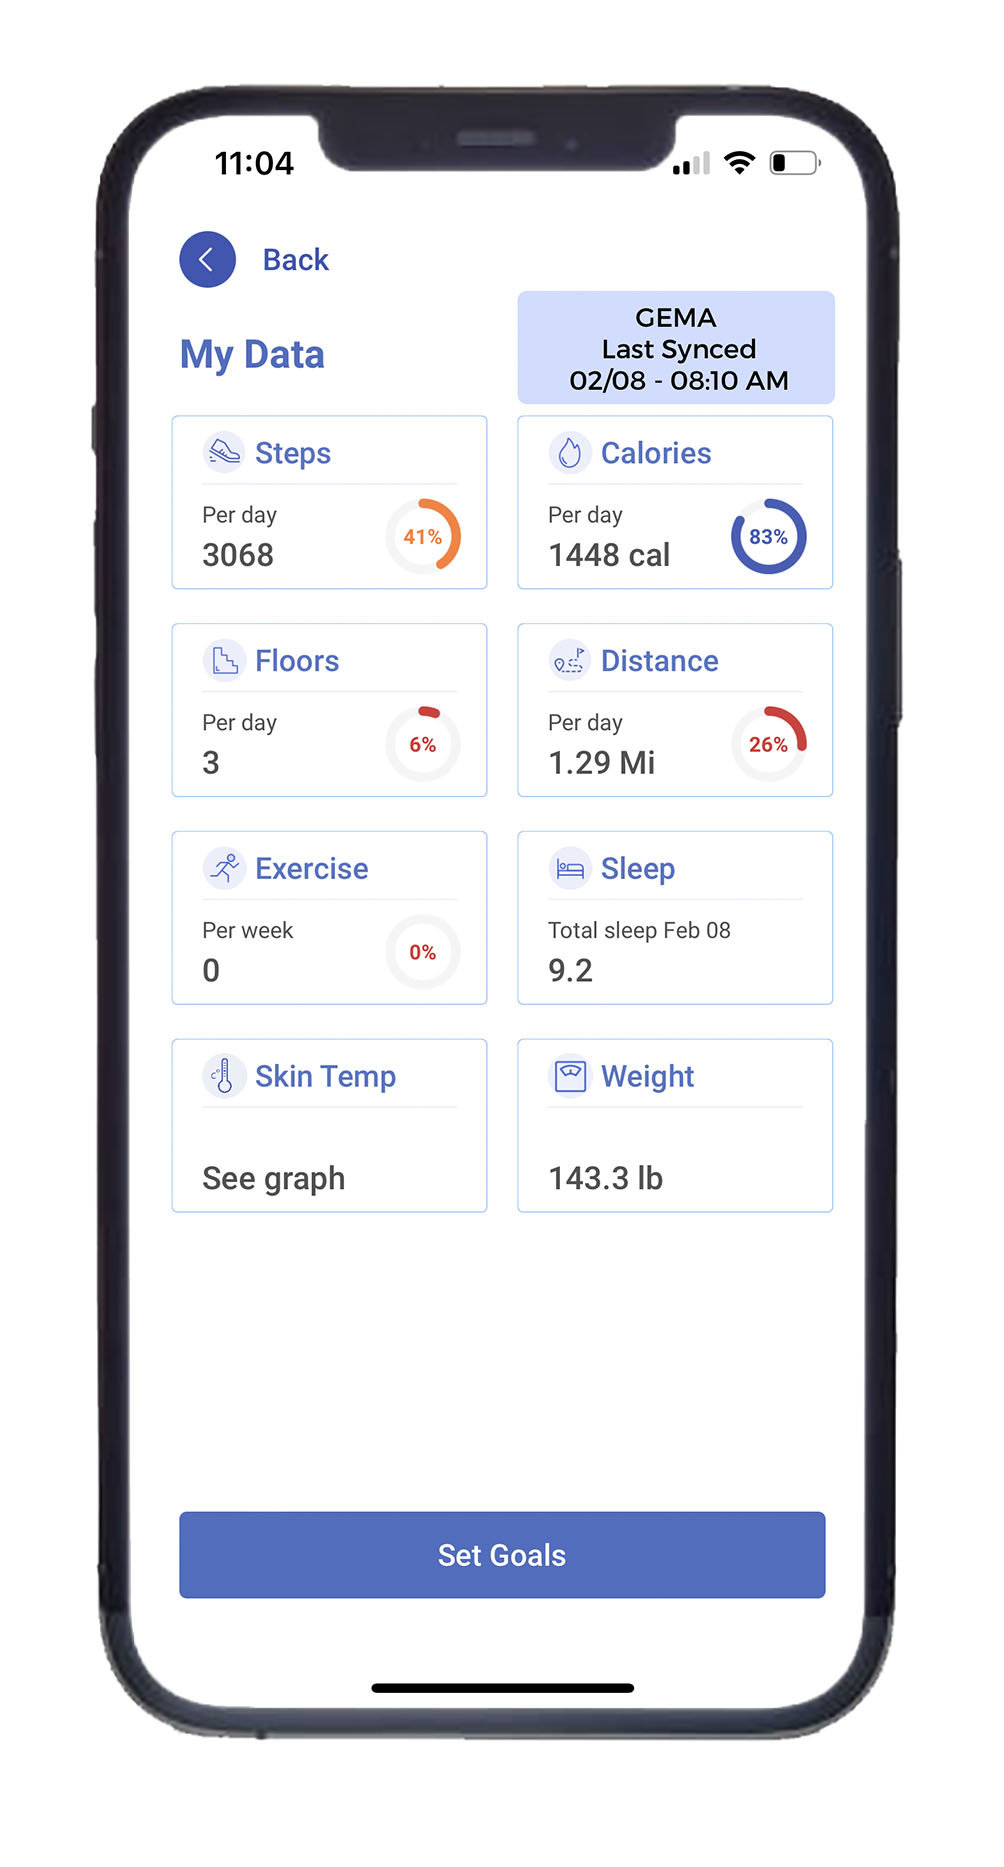 Personal Data      
Review and gain insights into your daily activities, including step count, distance, activity progression, and calories burned. Monitor elevation, mindfulness, sleep patterns, and body temperature for a comprehensive wellness tracking experience with the Gema Wellness Tracker.